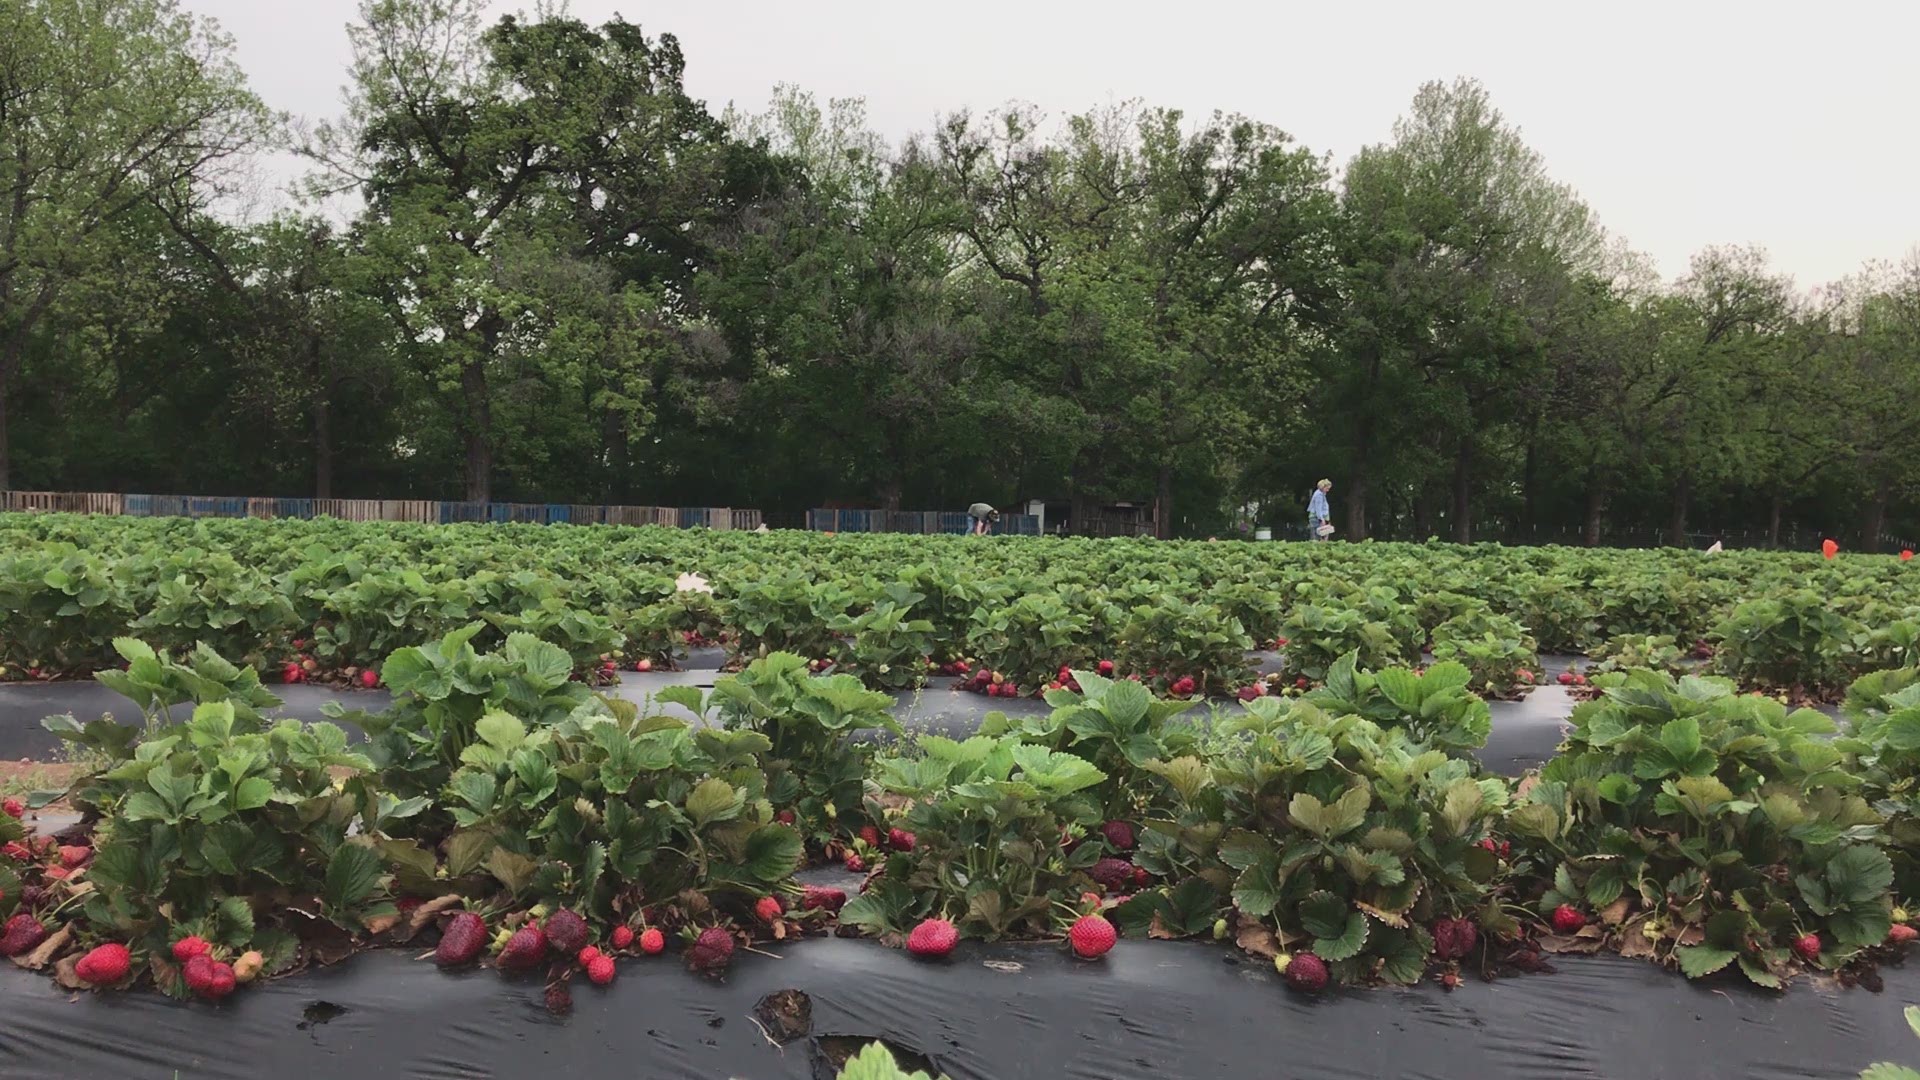 Here's a look at Sweet Berry Farm in Marble Falls.